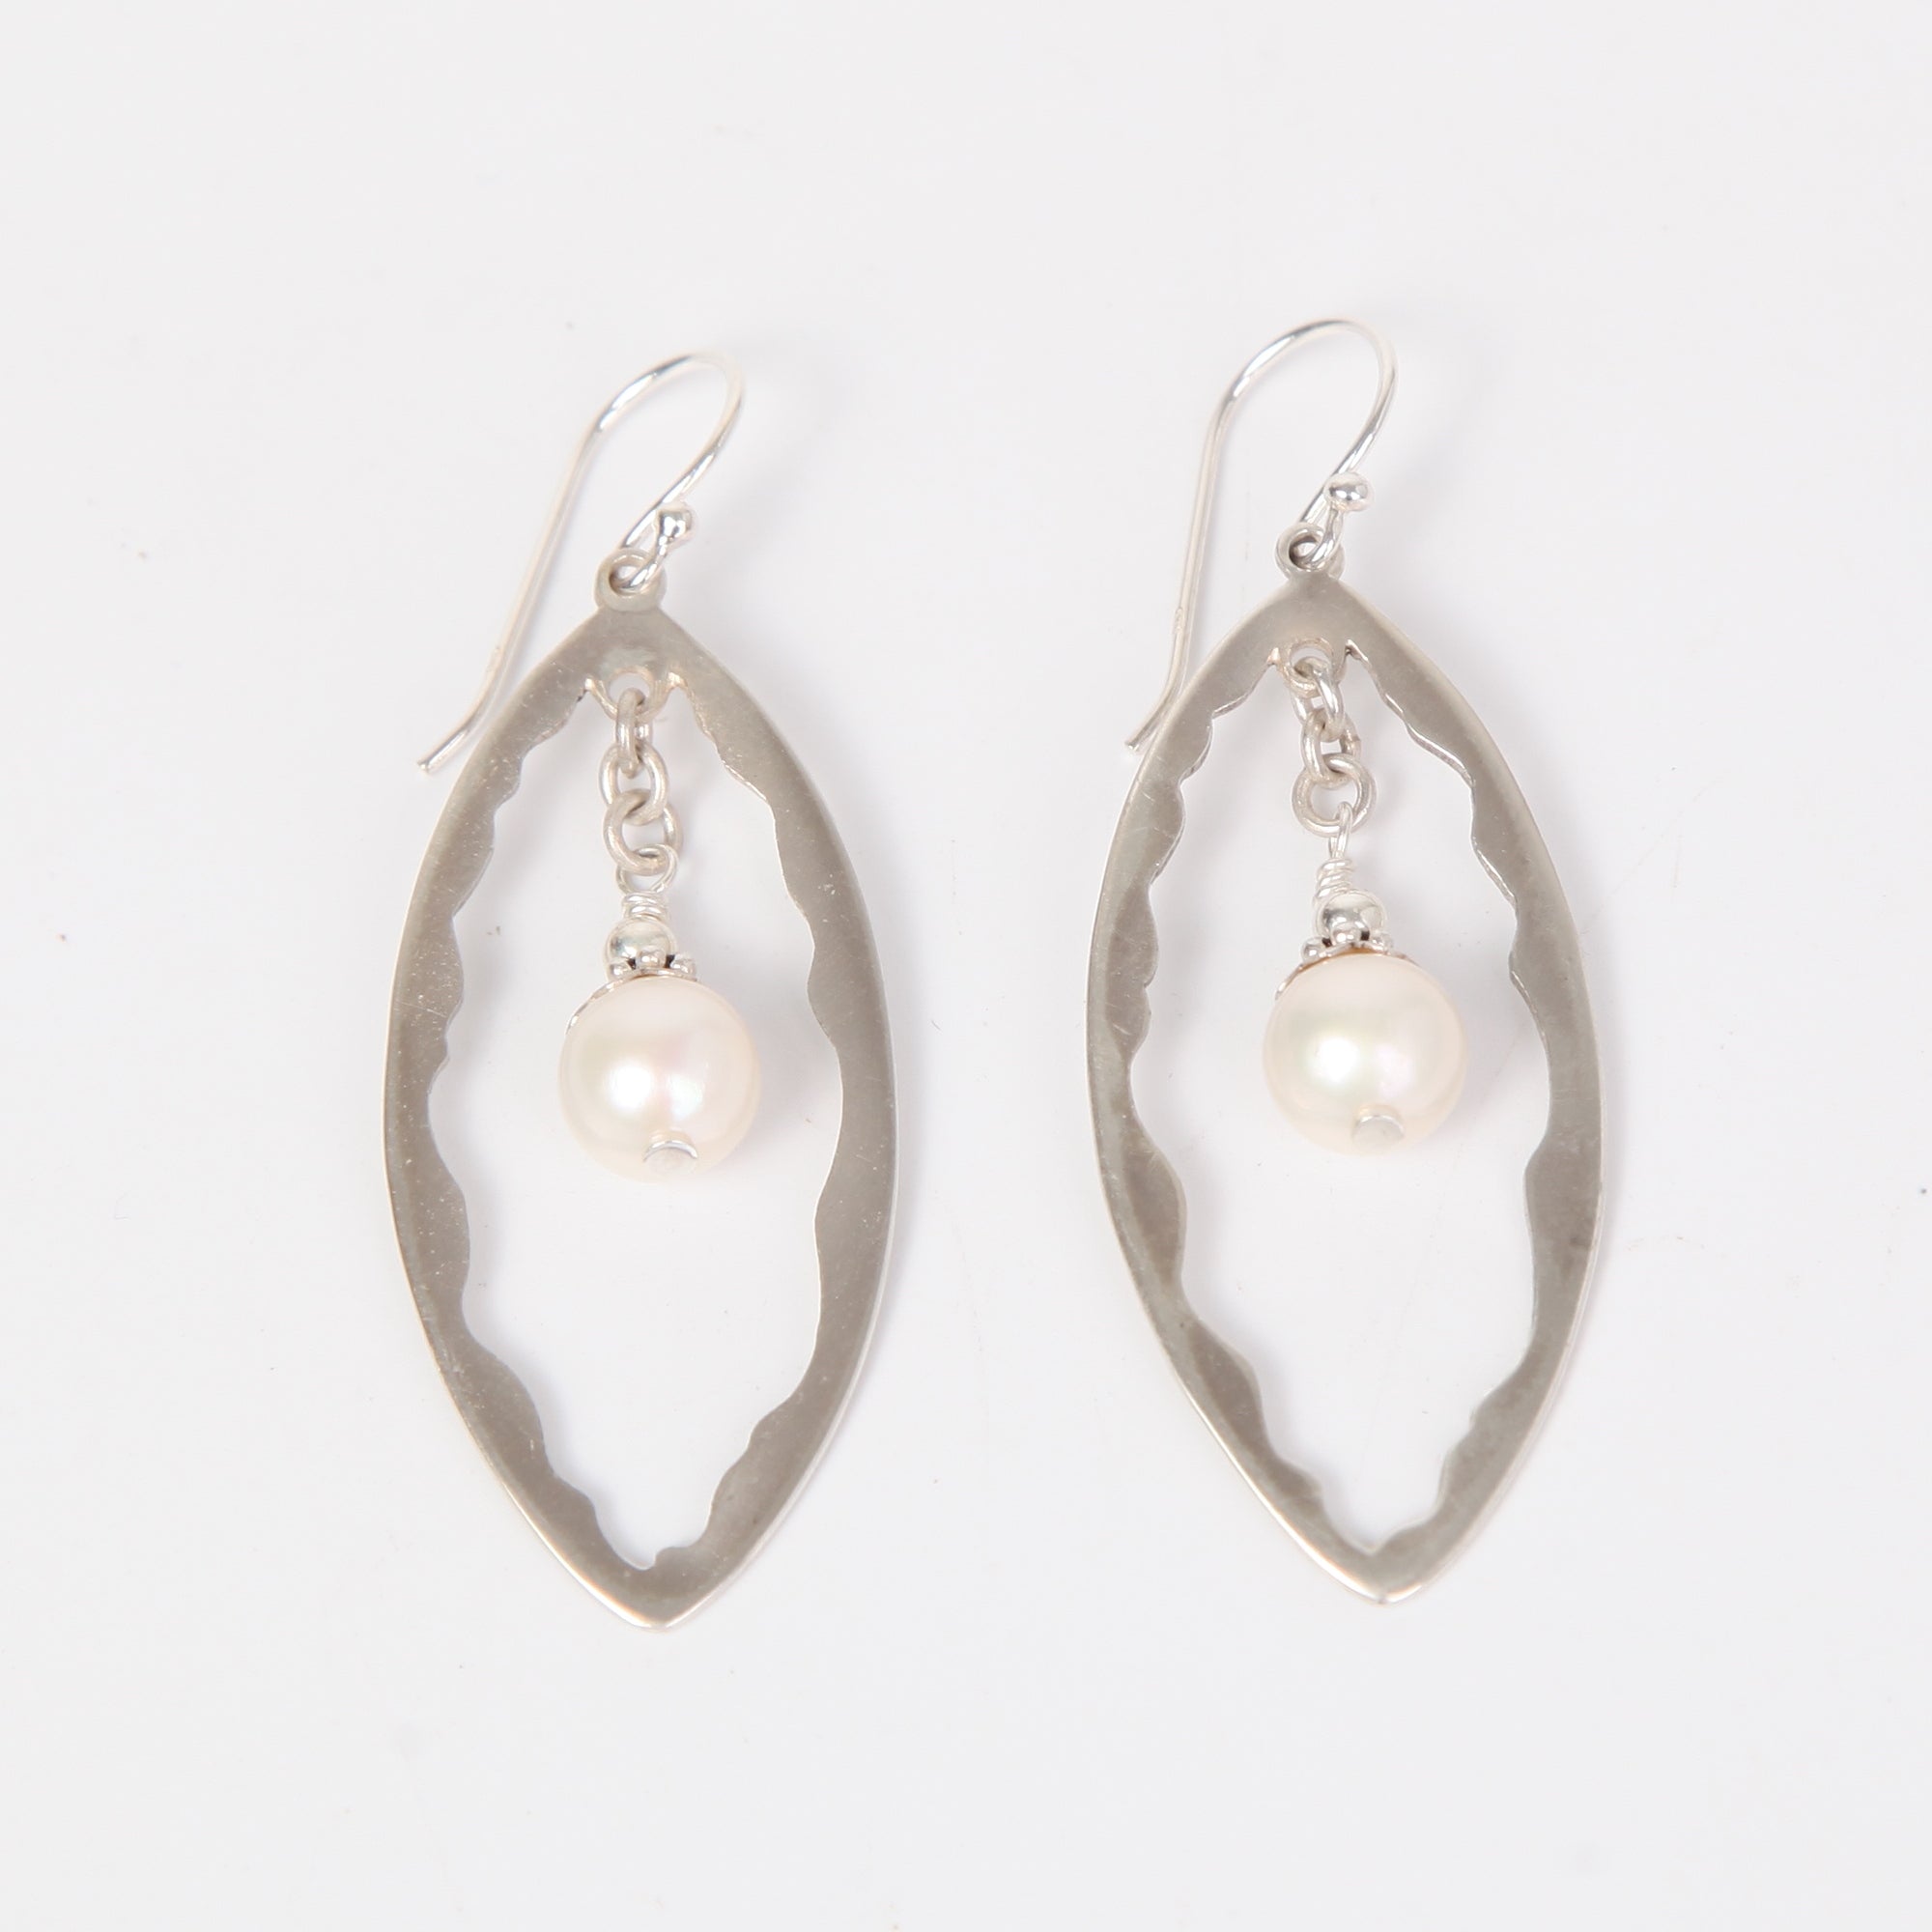 Oval Sterling Silver Earrings with Fresh Water Pearls